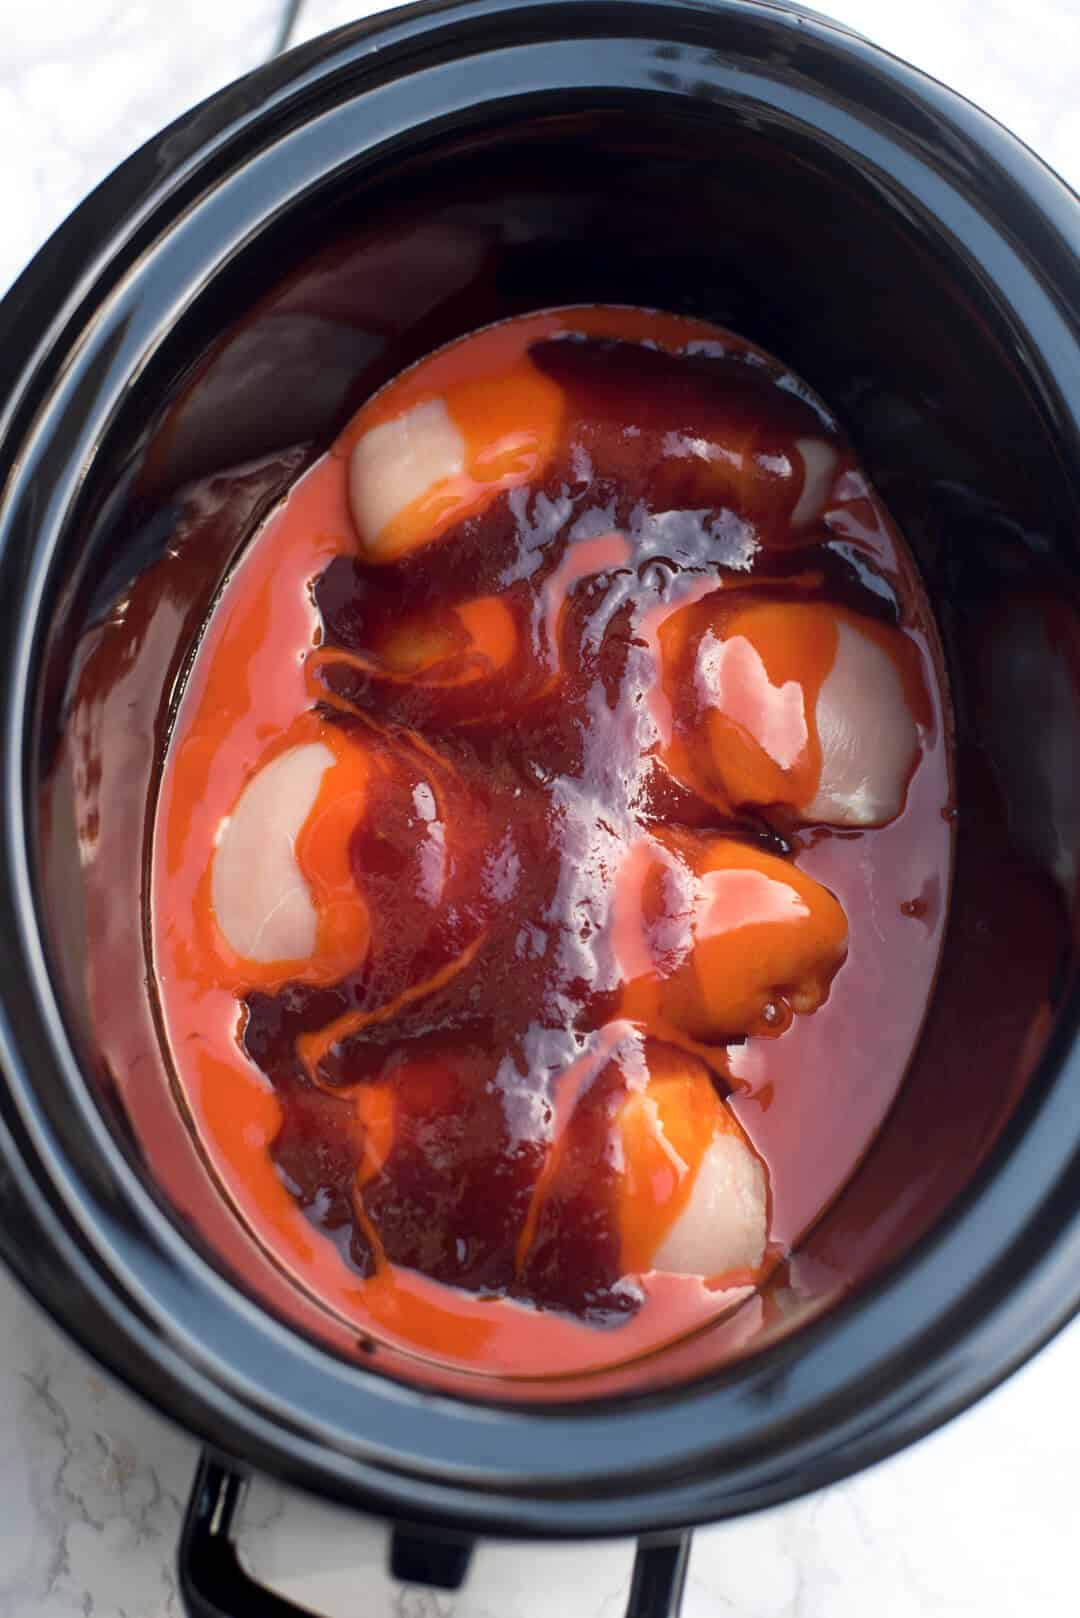 Raw chicken in a slow cooker topped with wing sauce and BBQ sauce.